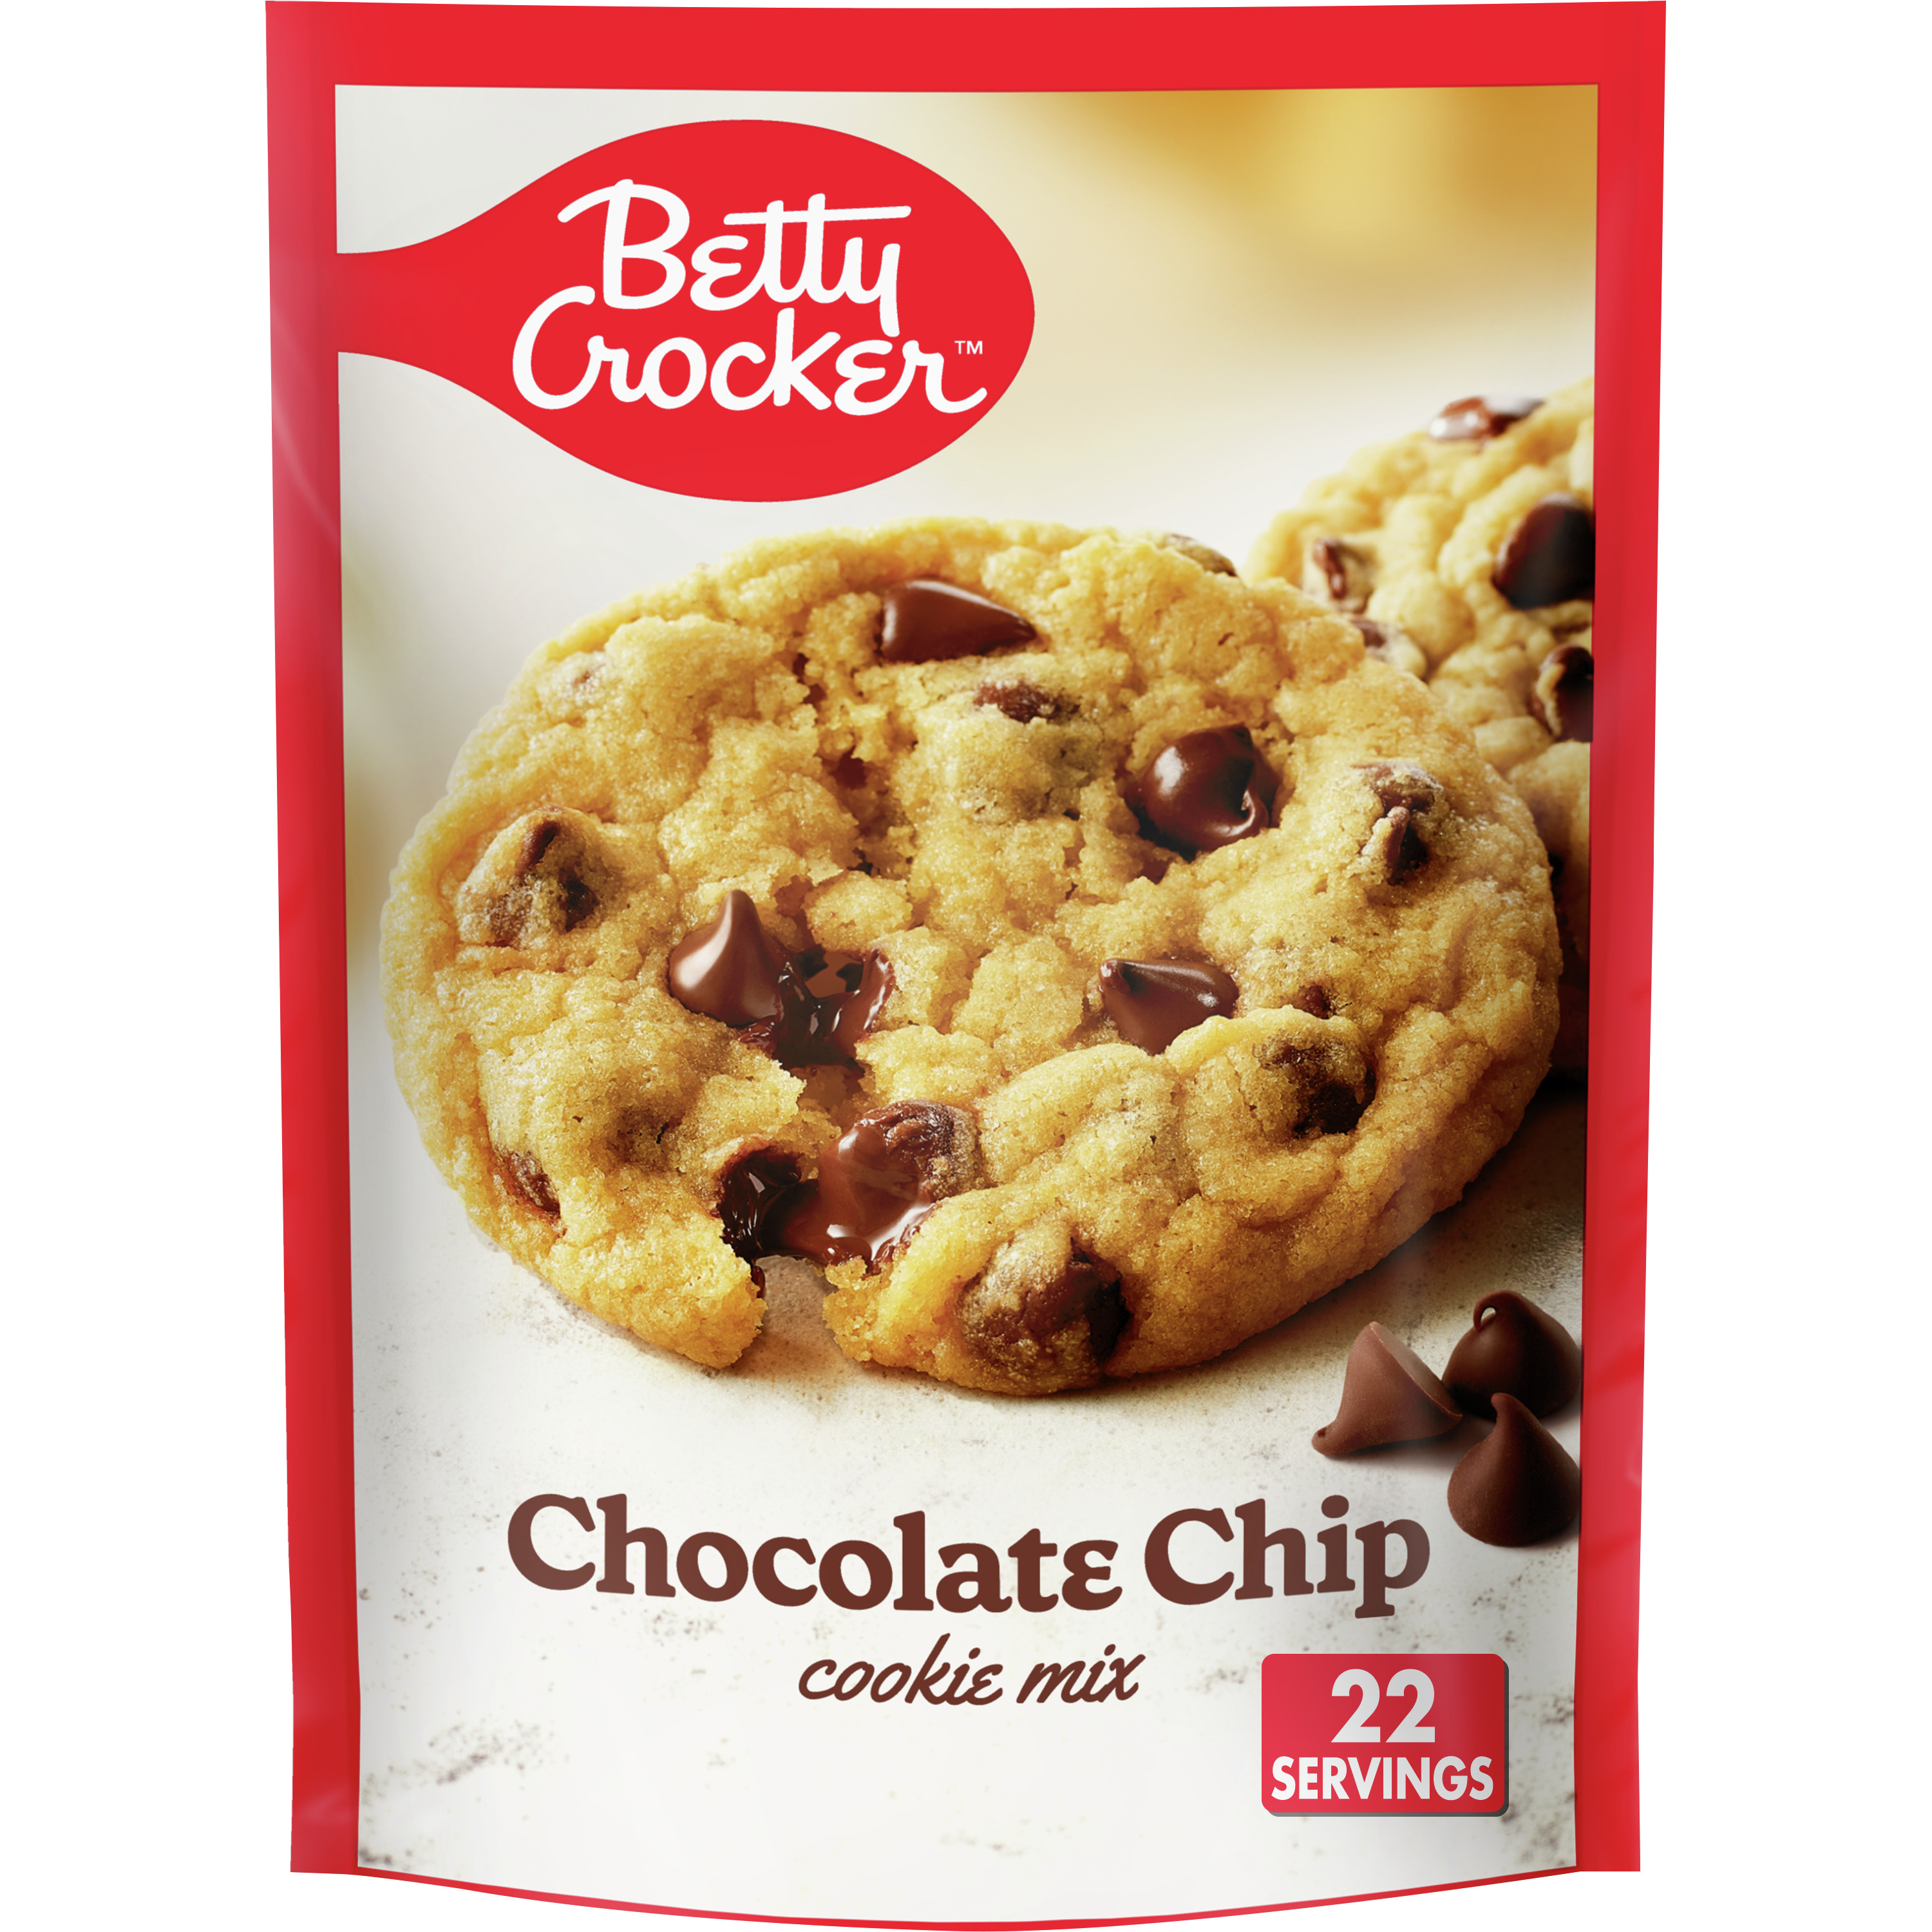 Betty Crocker Chocolate Chip Cookies, Cookie Baking Mix, 17.5 oz - image 1 of 9